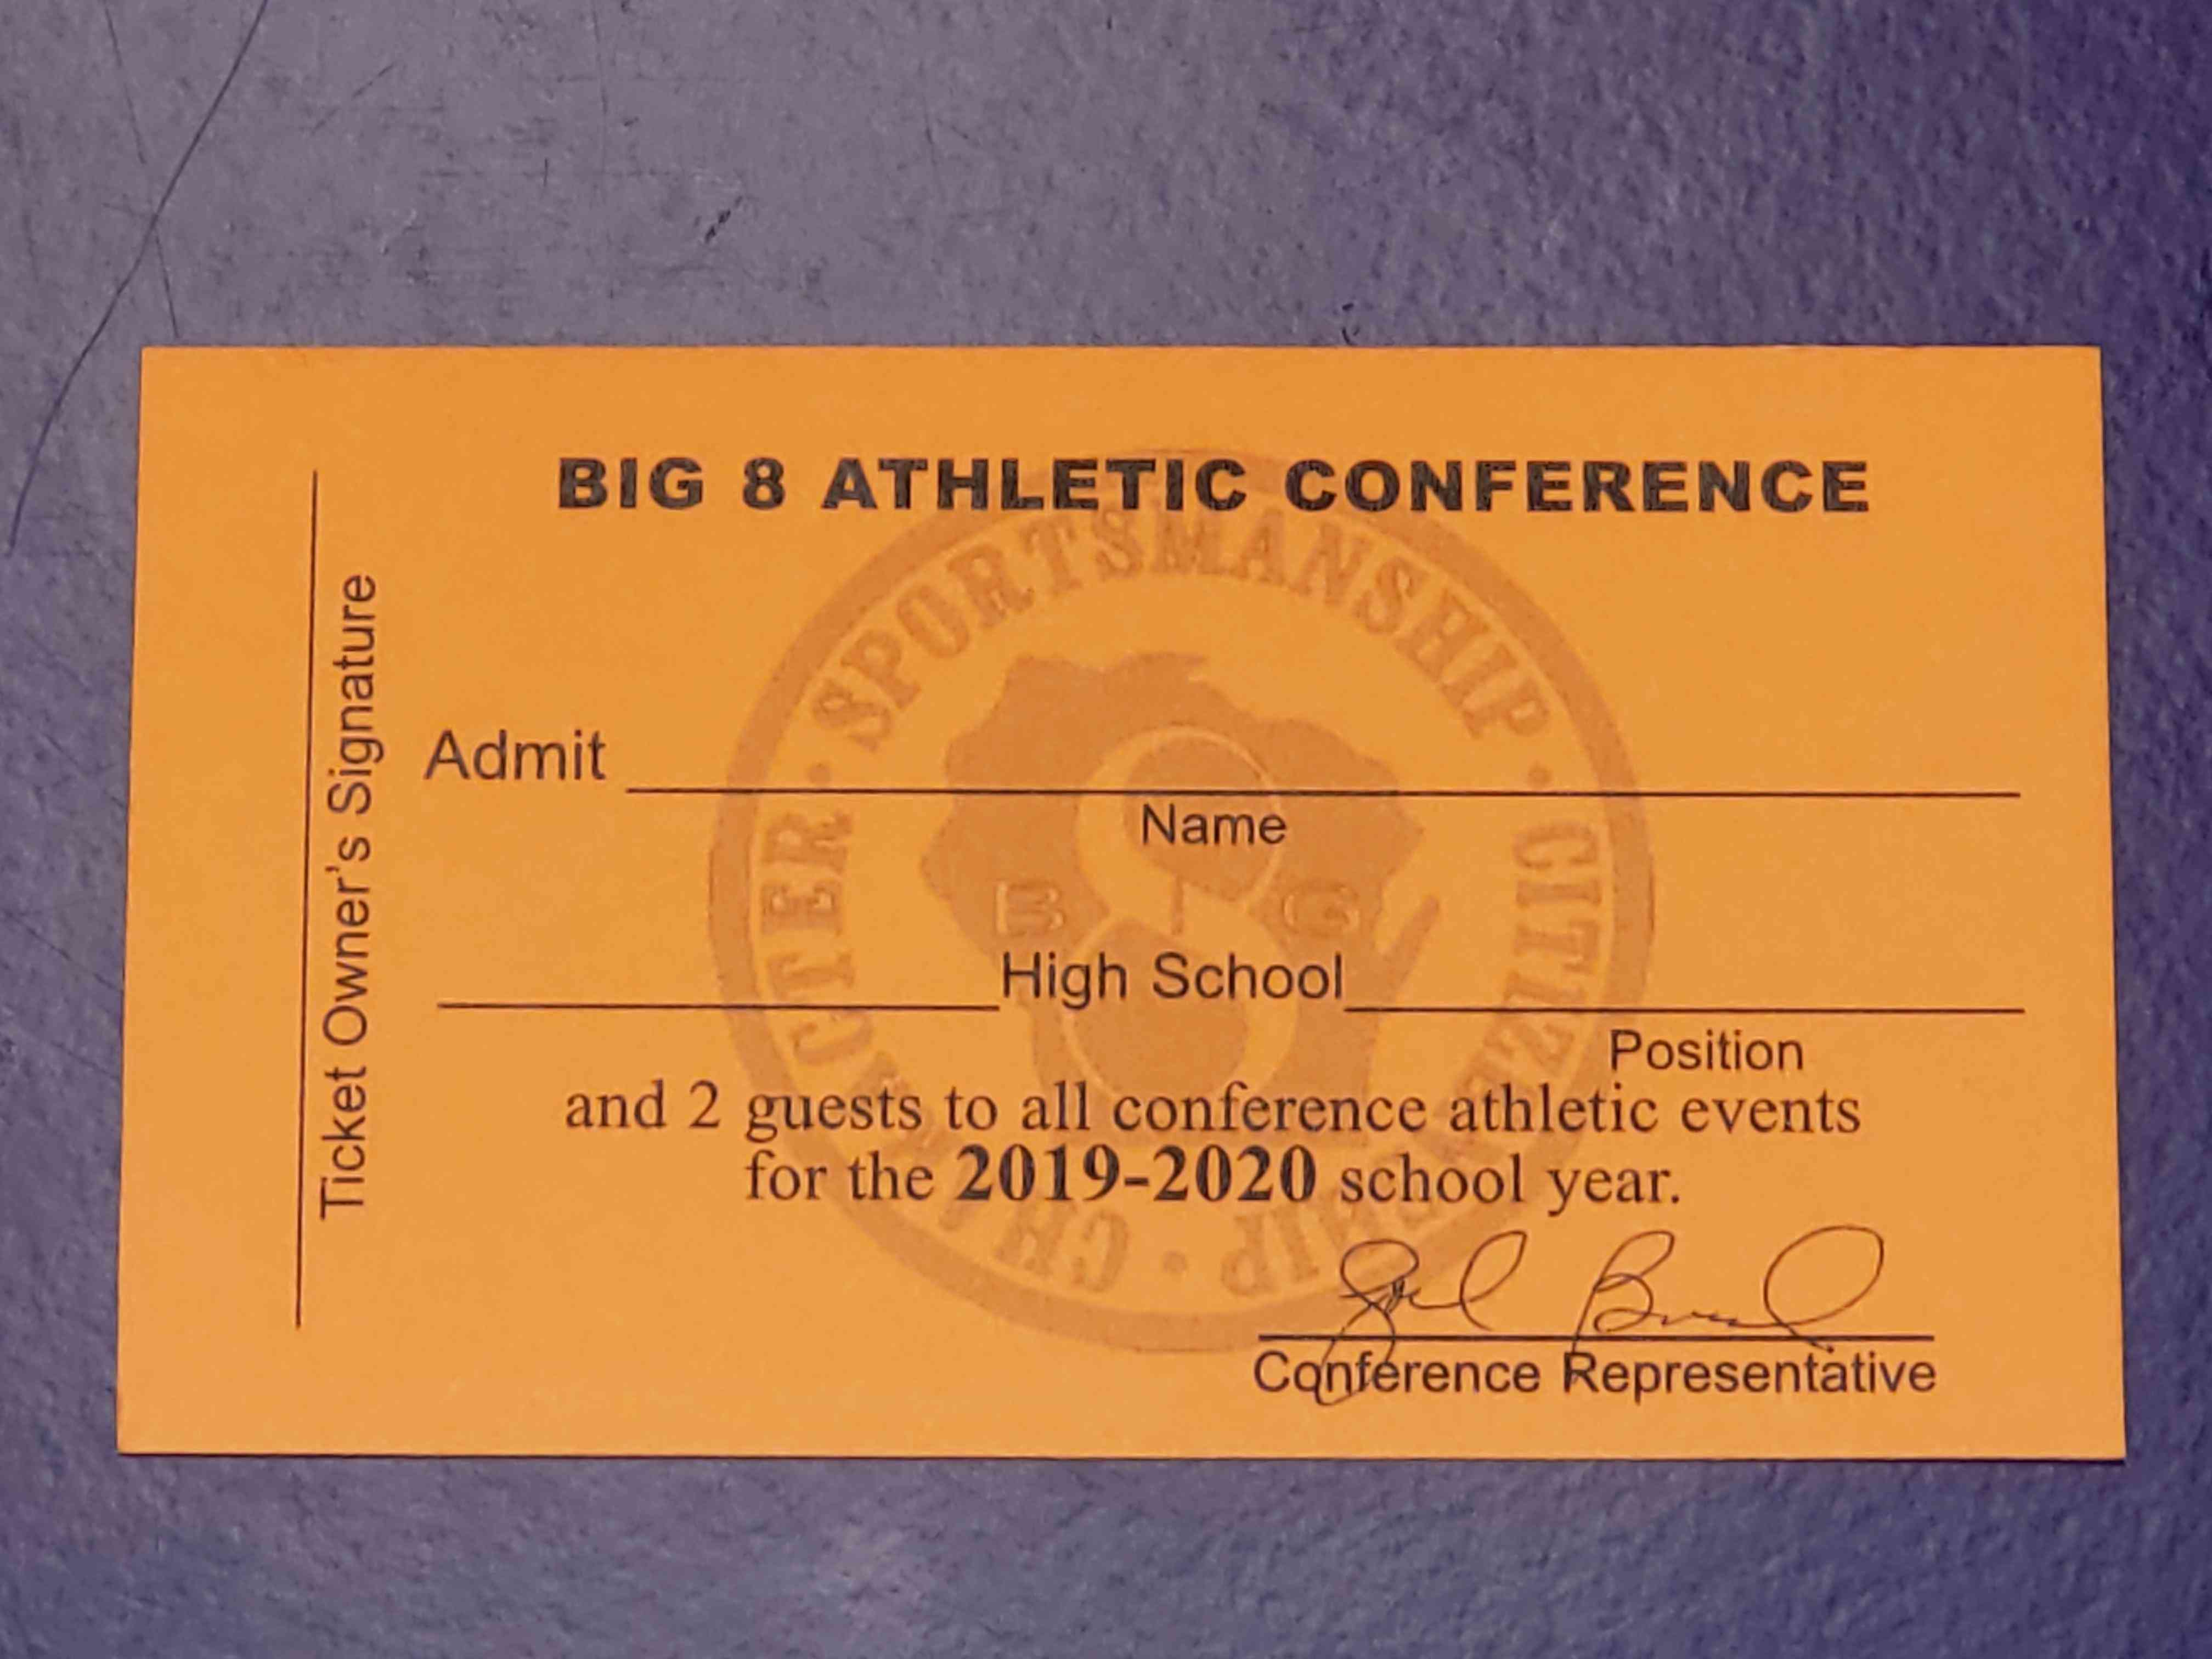 T-Shirt and Big 8 Conference Pass Image